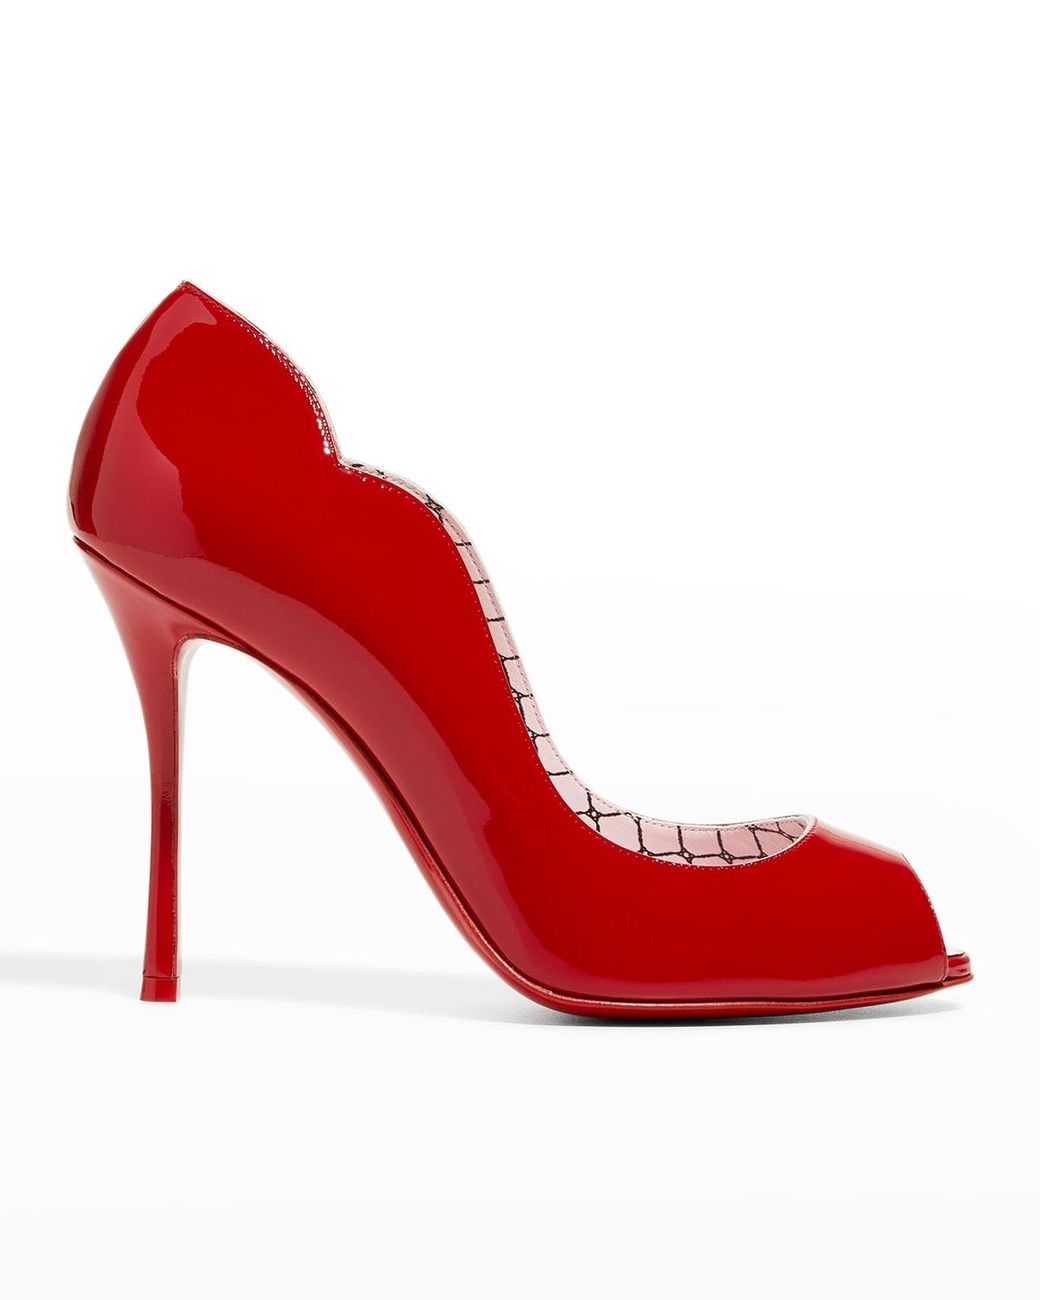 Vocosi Red Sole Pumps vs. Christian Louboutin's. A very detailed